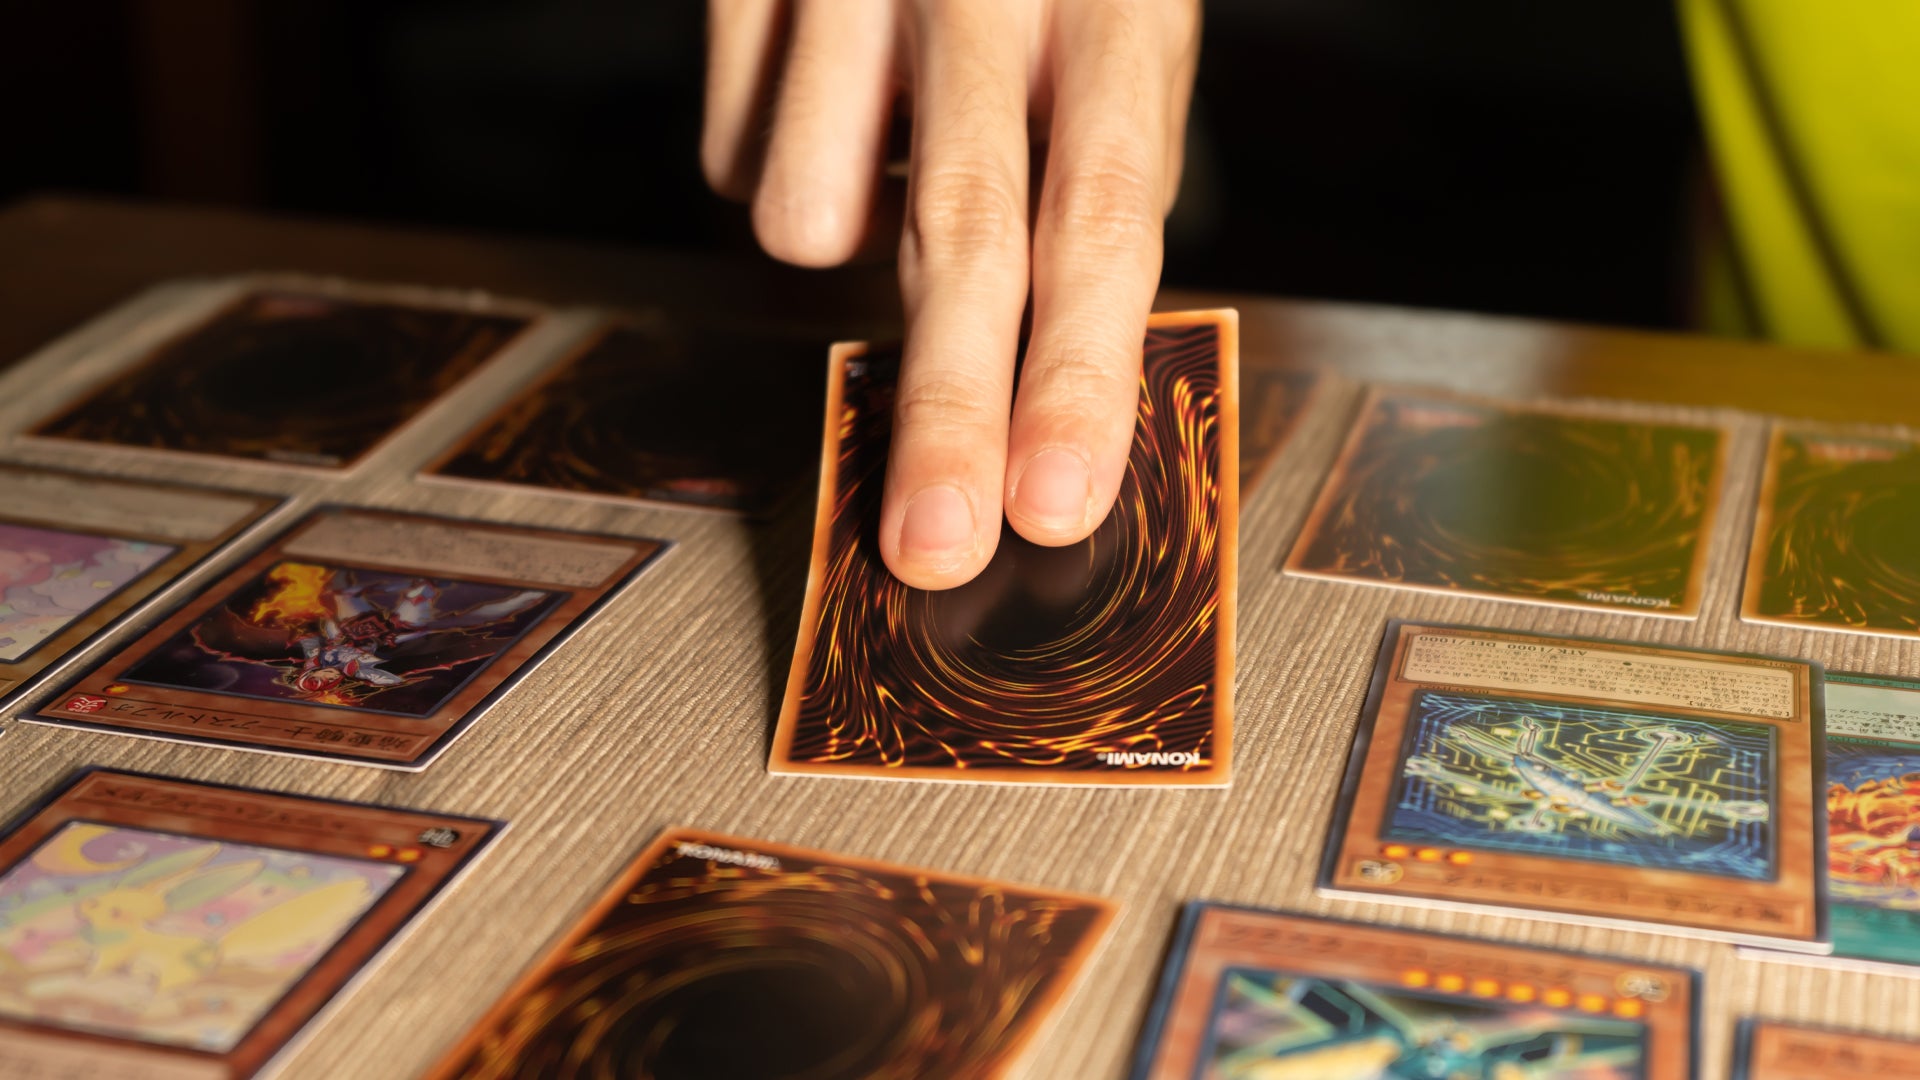 A hand holds a Yu-Gi-Oh! card facedown with two fingers stretched across its back. There are additional Yu-Gi-Oh! cards on the table.